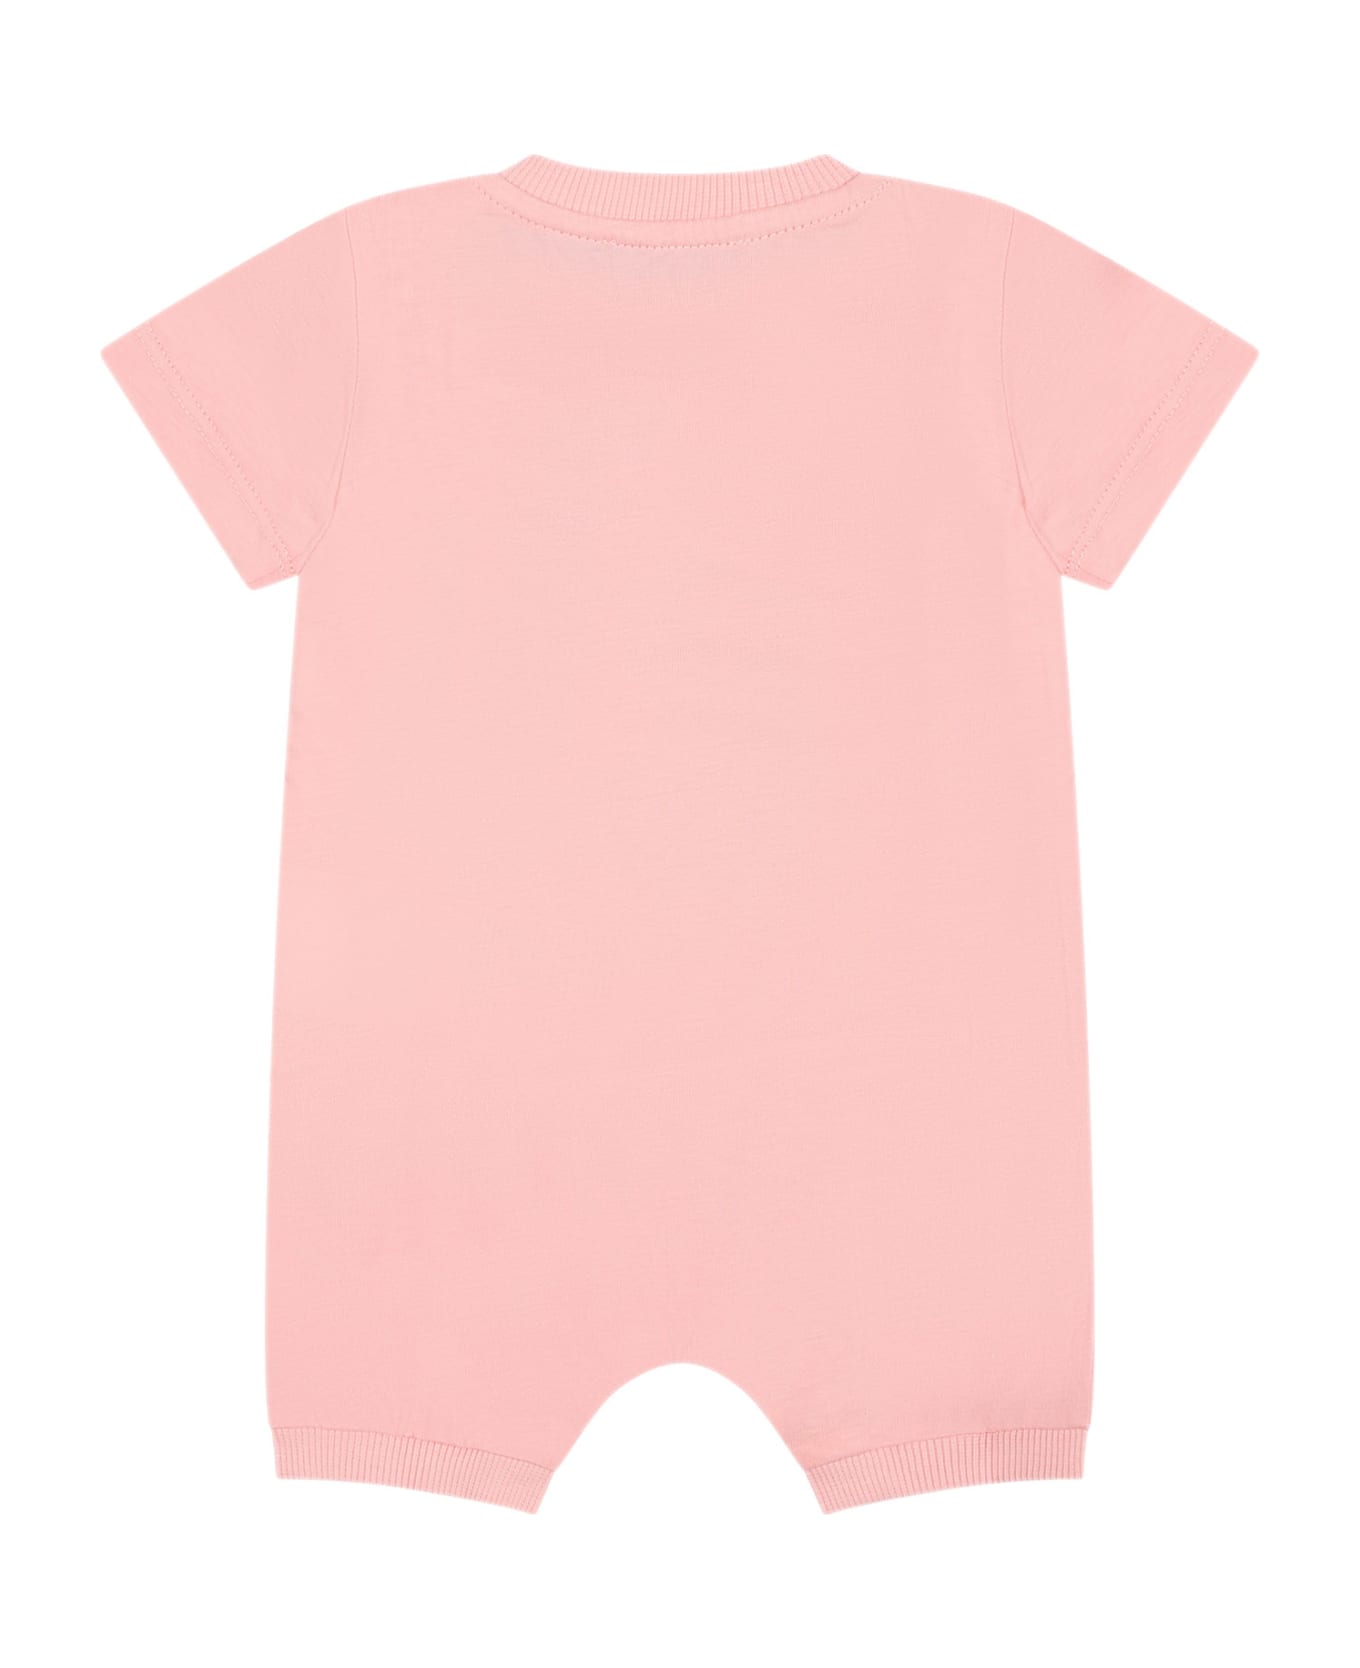 Moschino Pink Bodysuit For Babies With Teddy Bear And Pinwheel - Pink ボディスーツ＆セットアップ